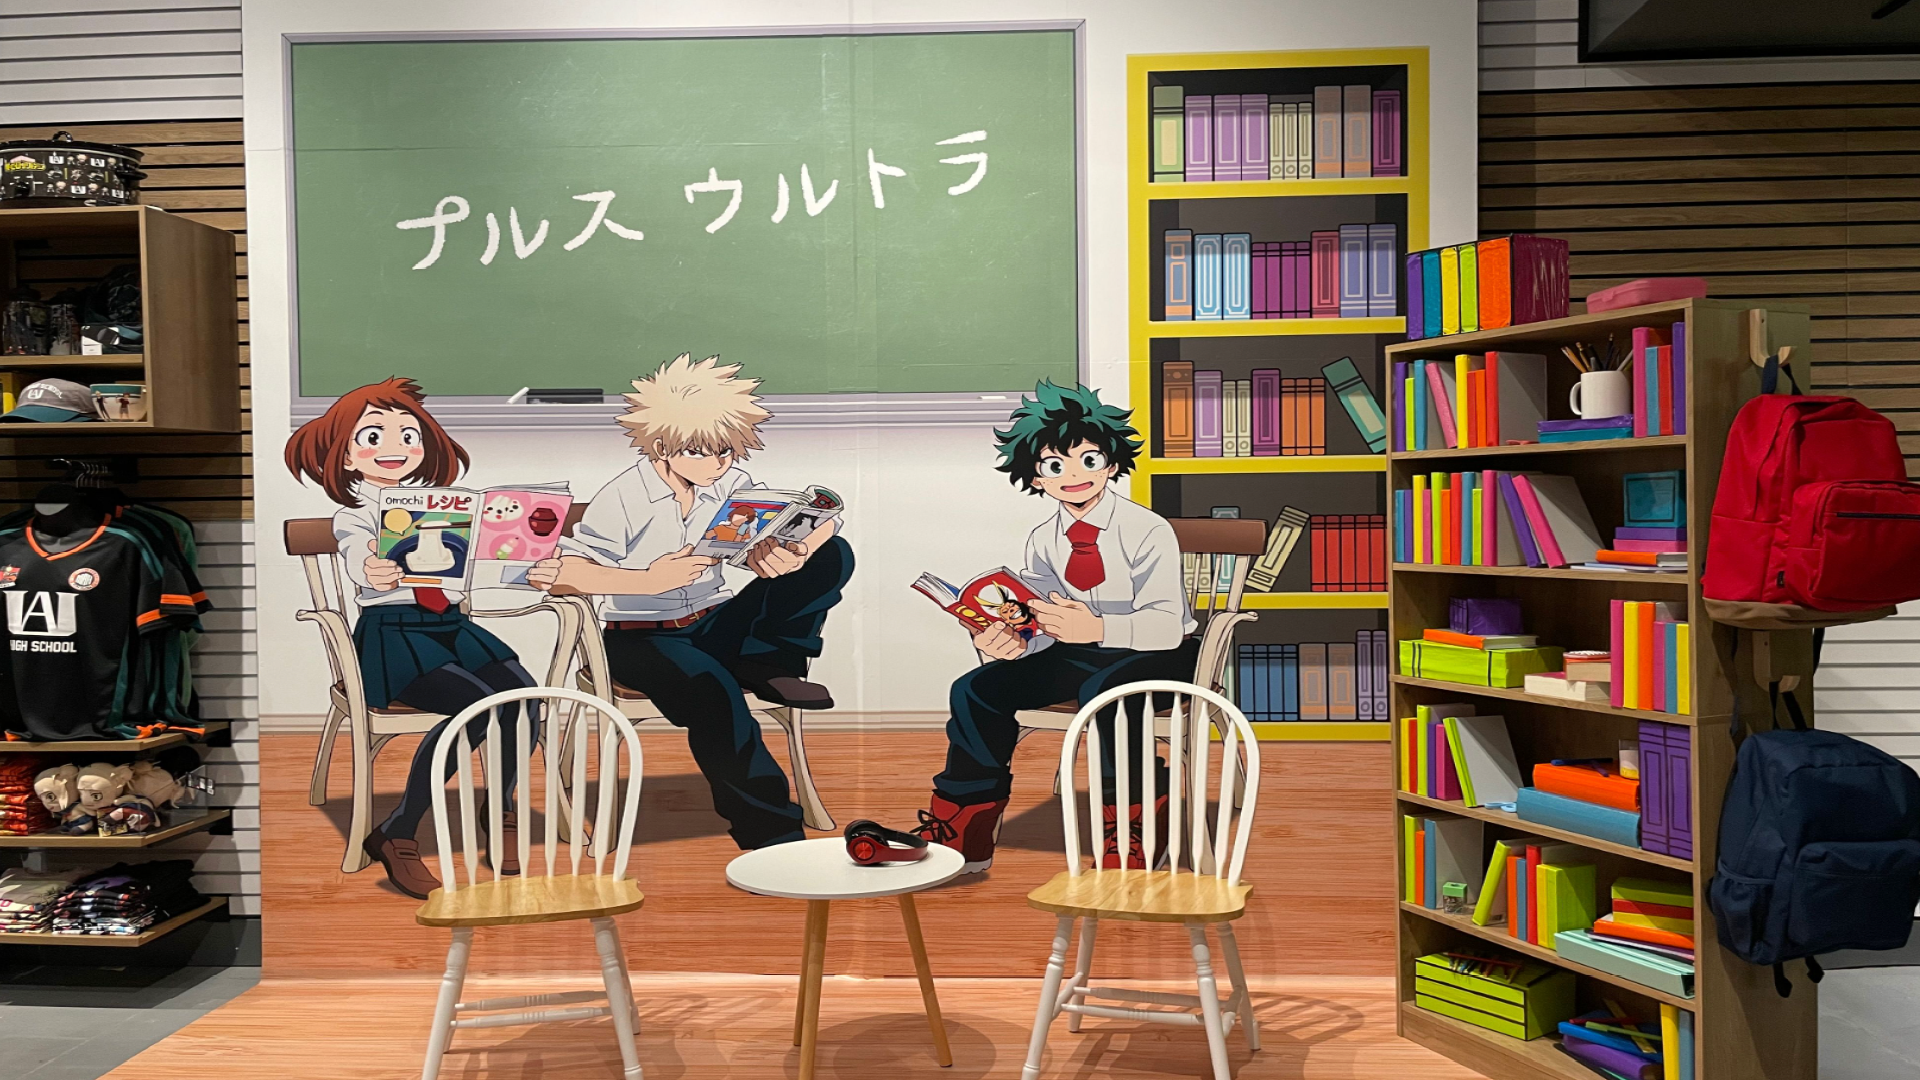 Crunchyroll Adds Several Popular Series To Ad-Supported Library